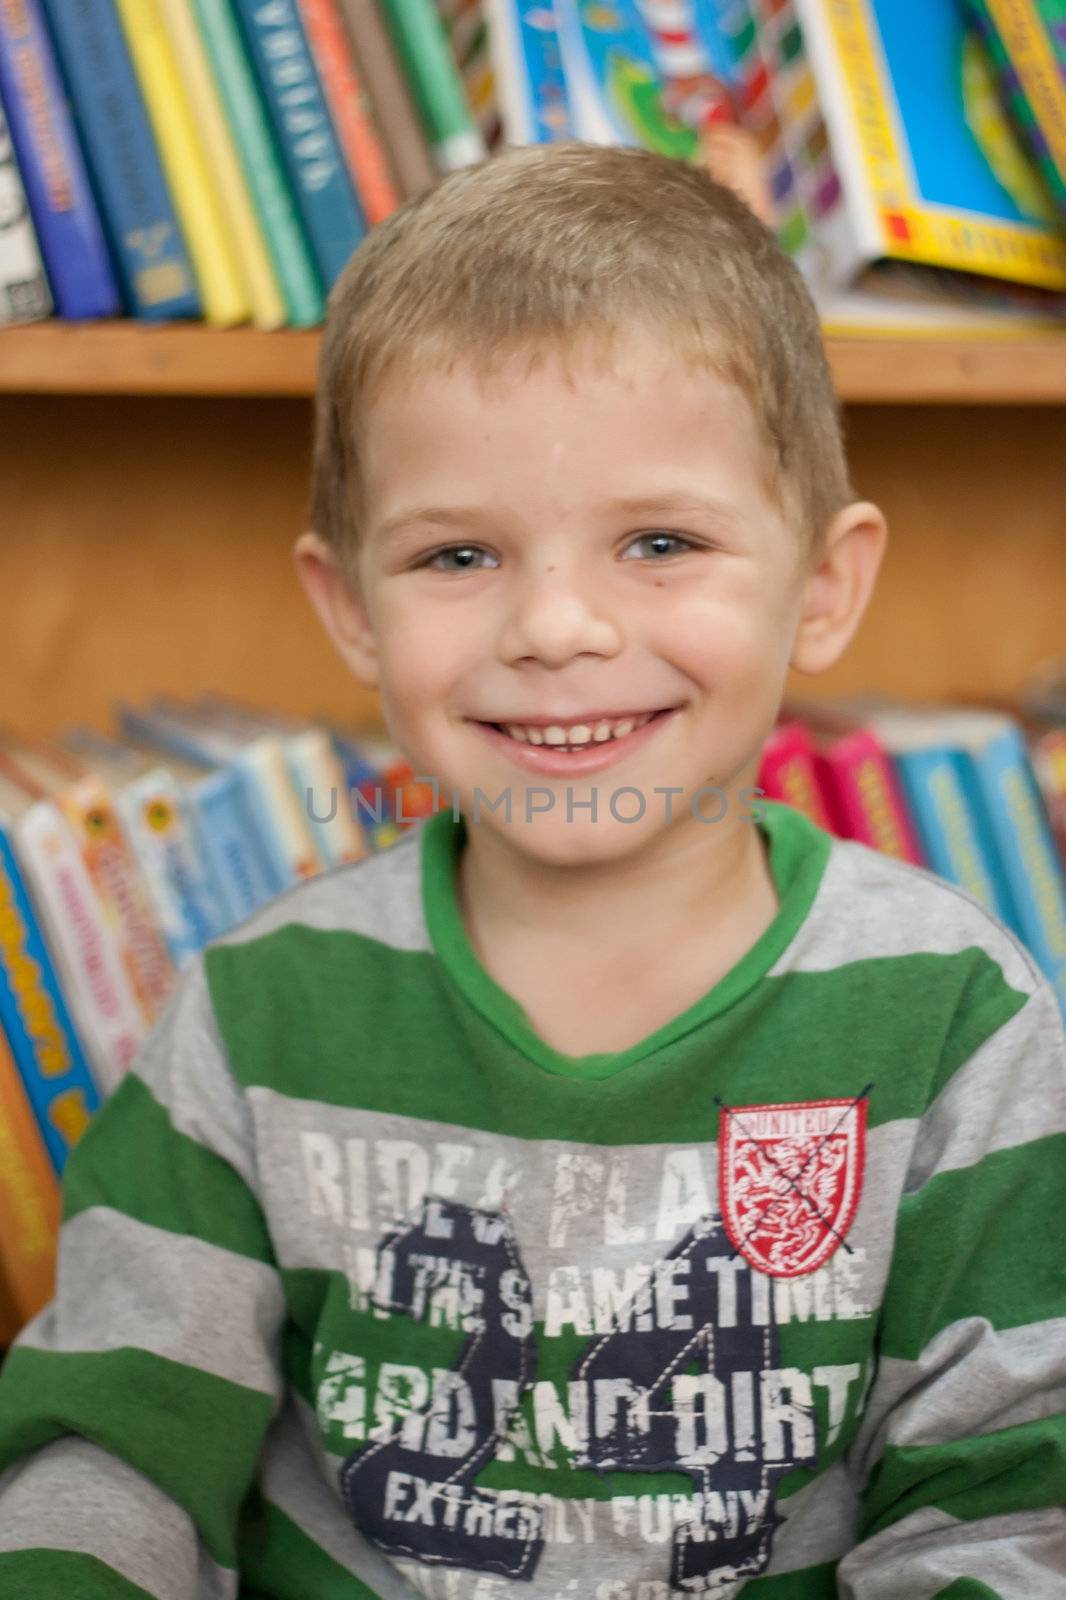 small boy smiling on the background of the books in the library